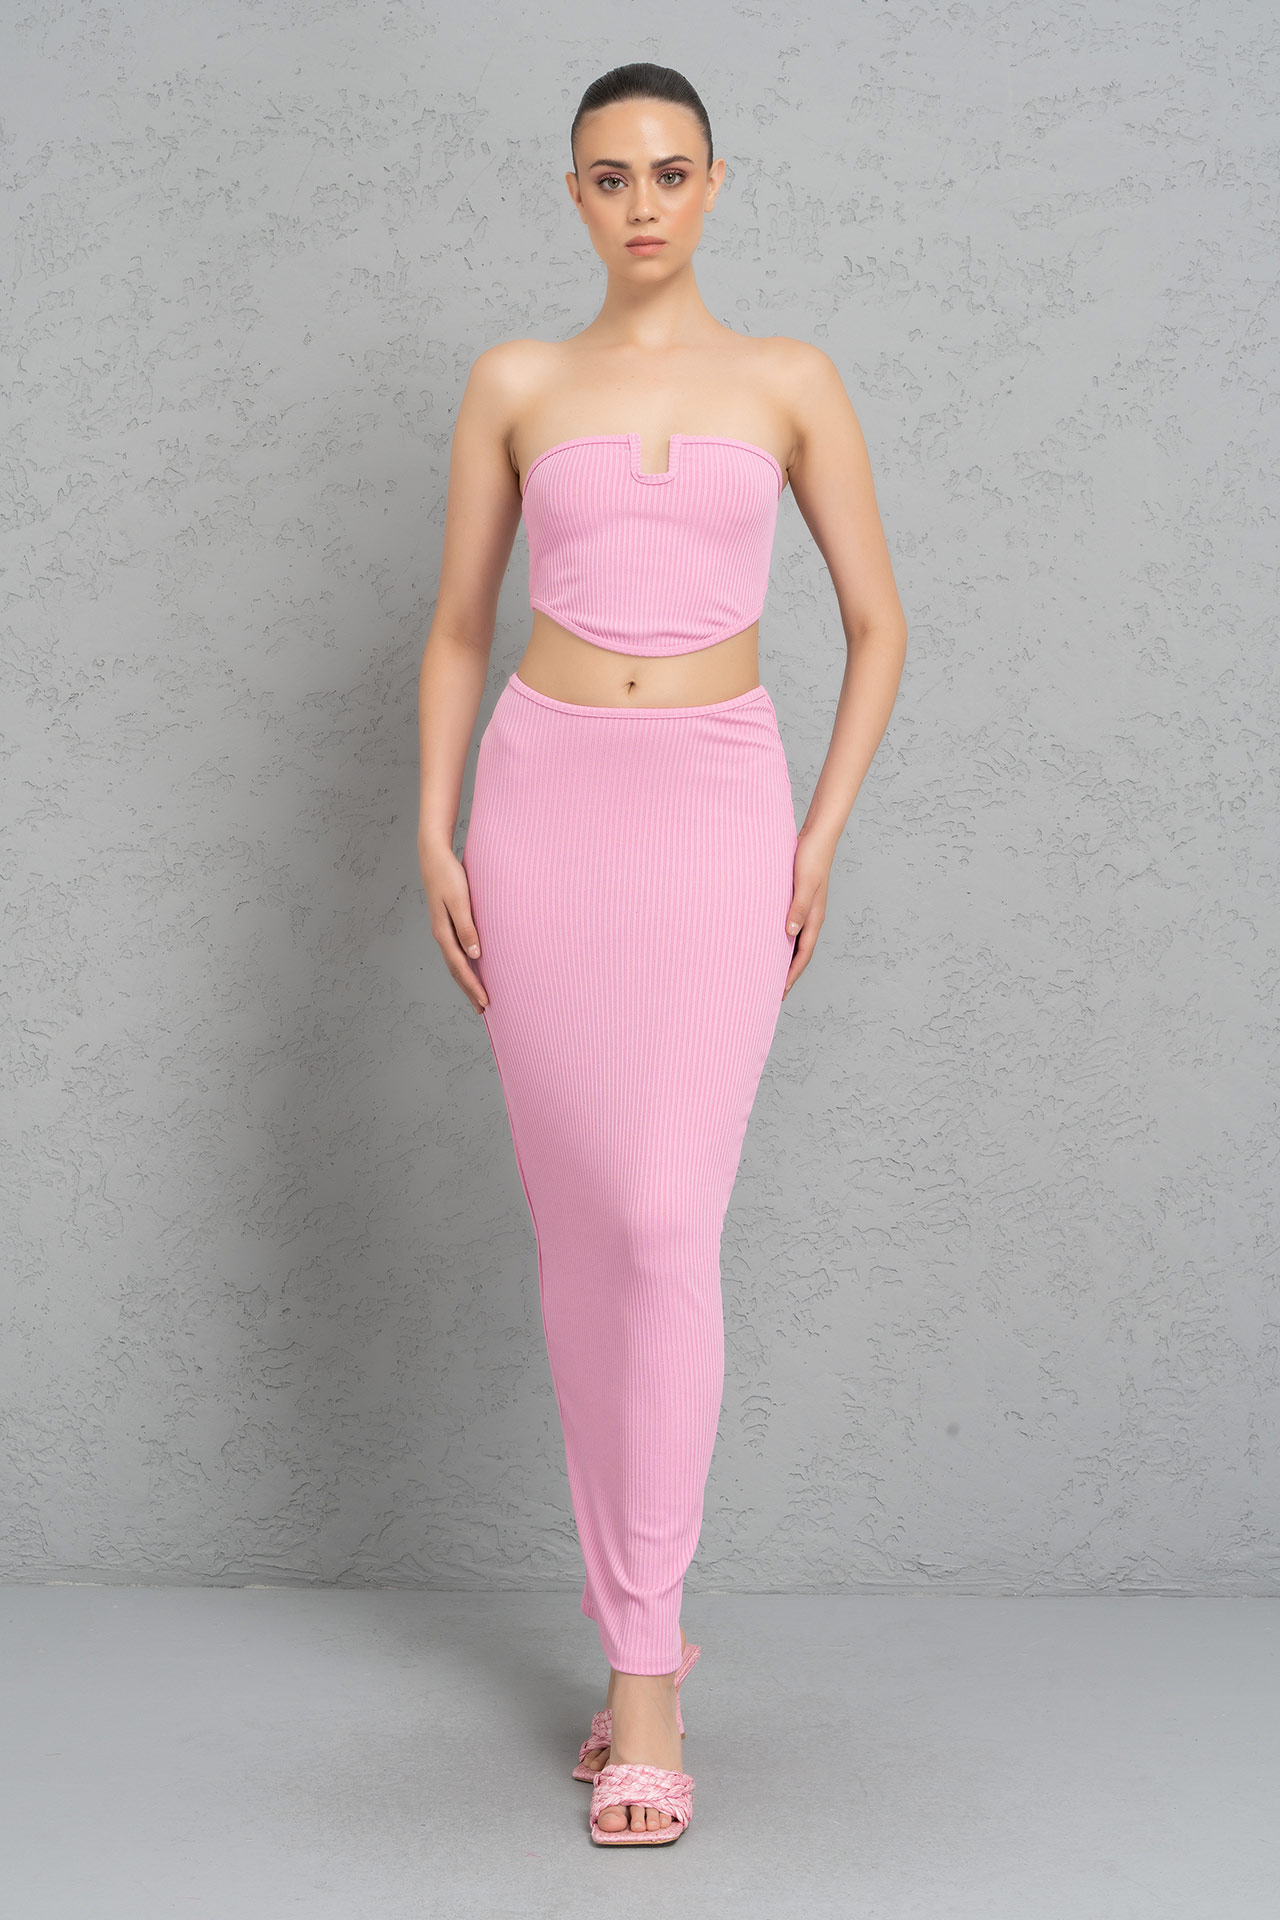 Wholesale New Pink U-Wire Tube Top & Skirt Set